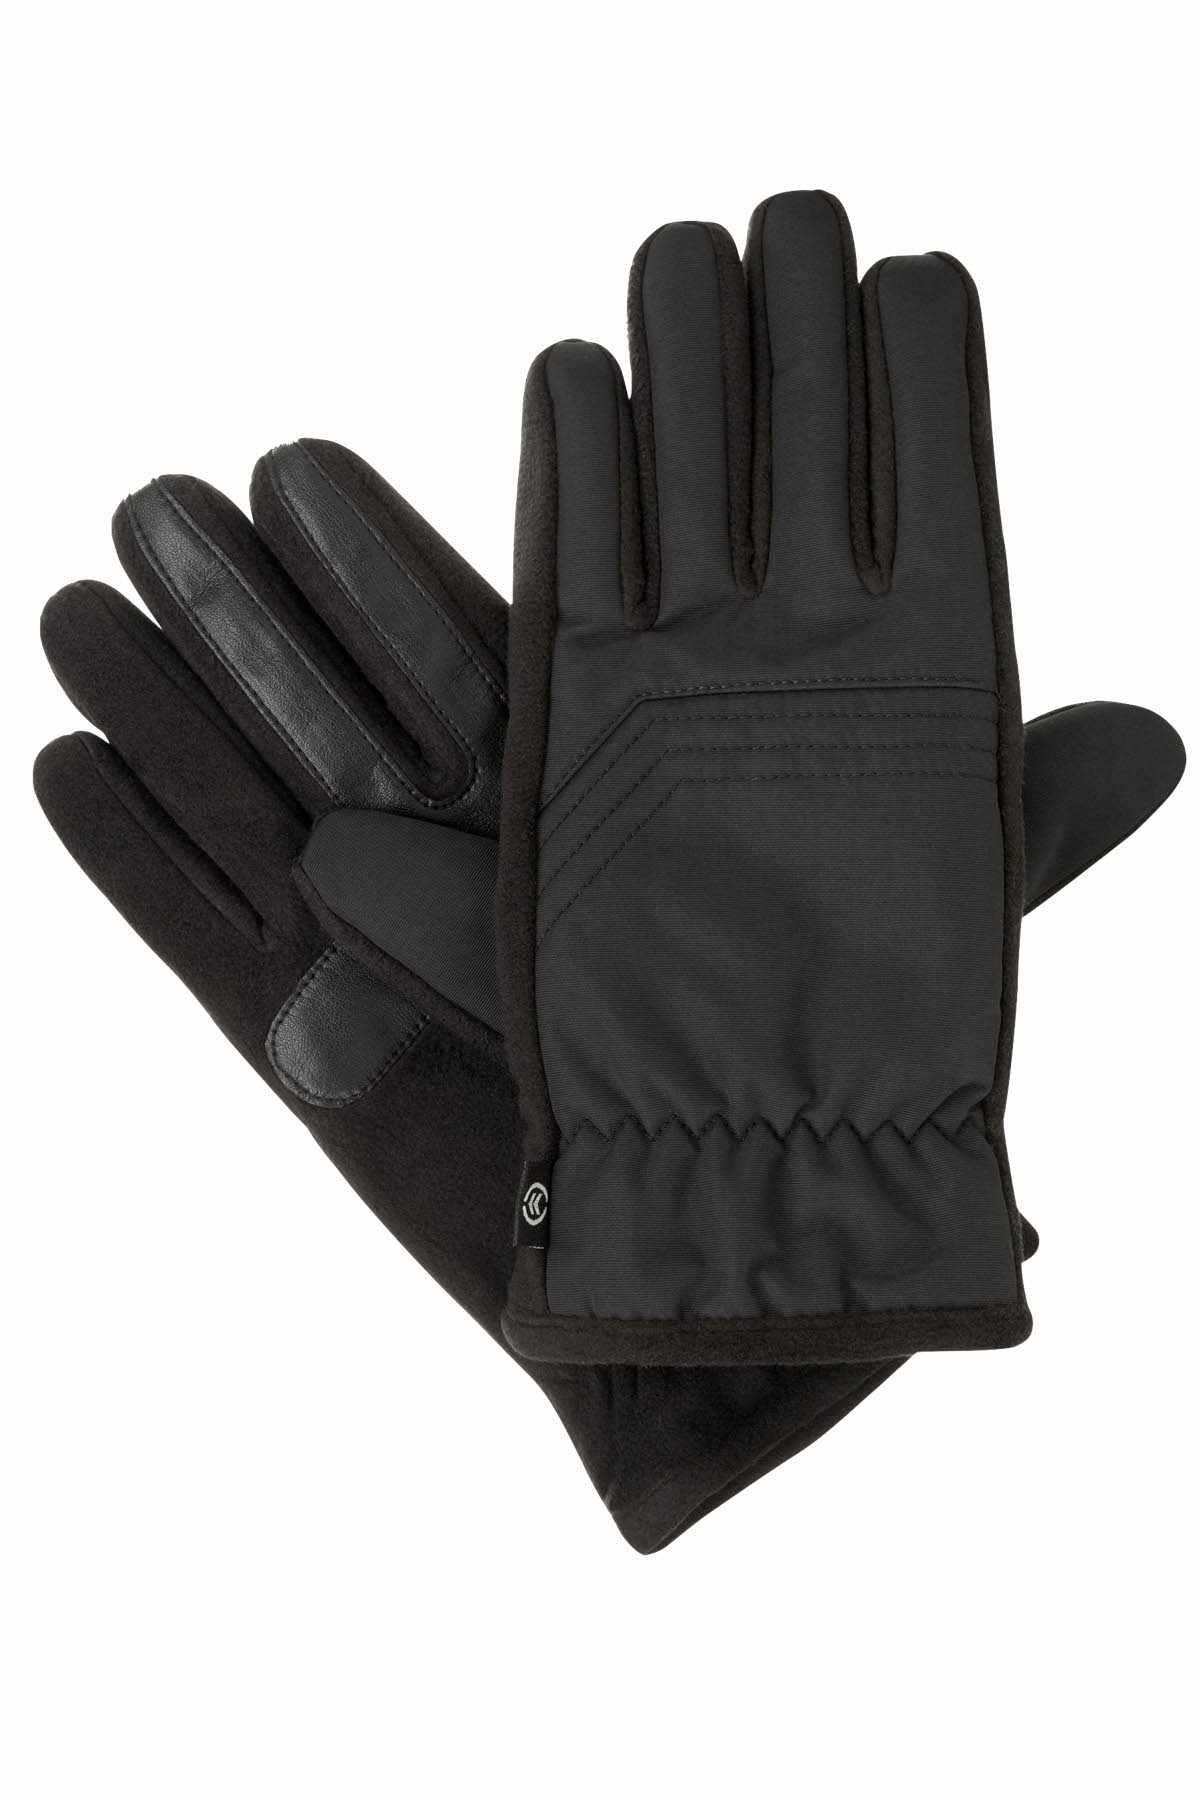 Isotoner Signature Black THERMAflex™ CORE SmarTouch Touchscreen Gloves - Large